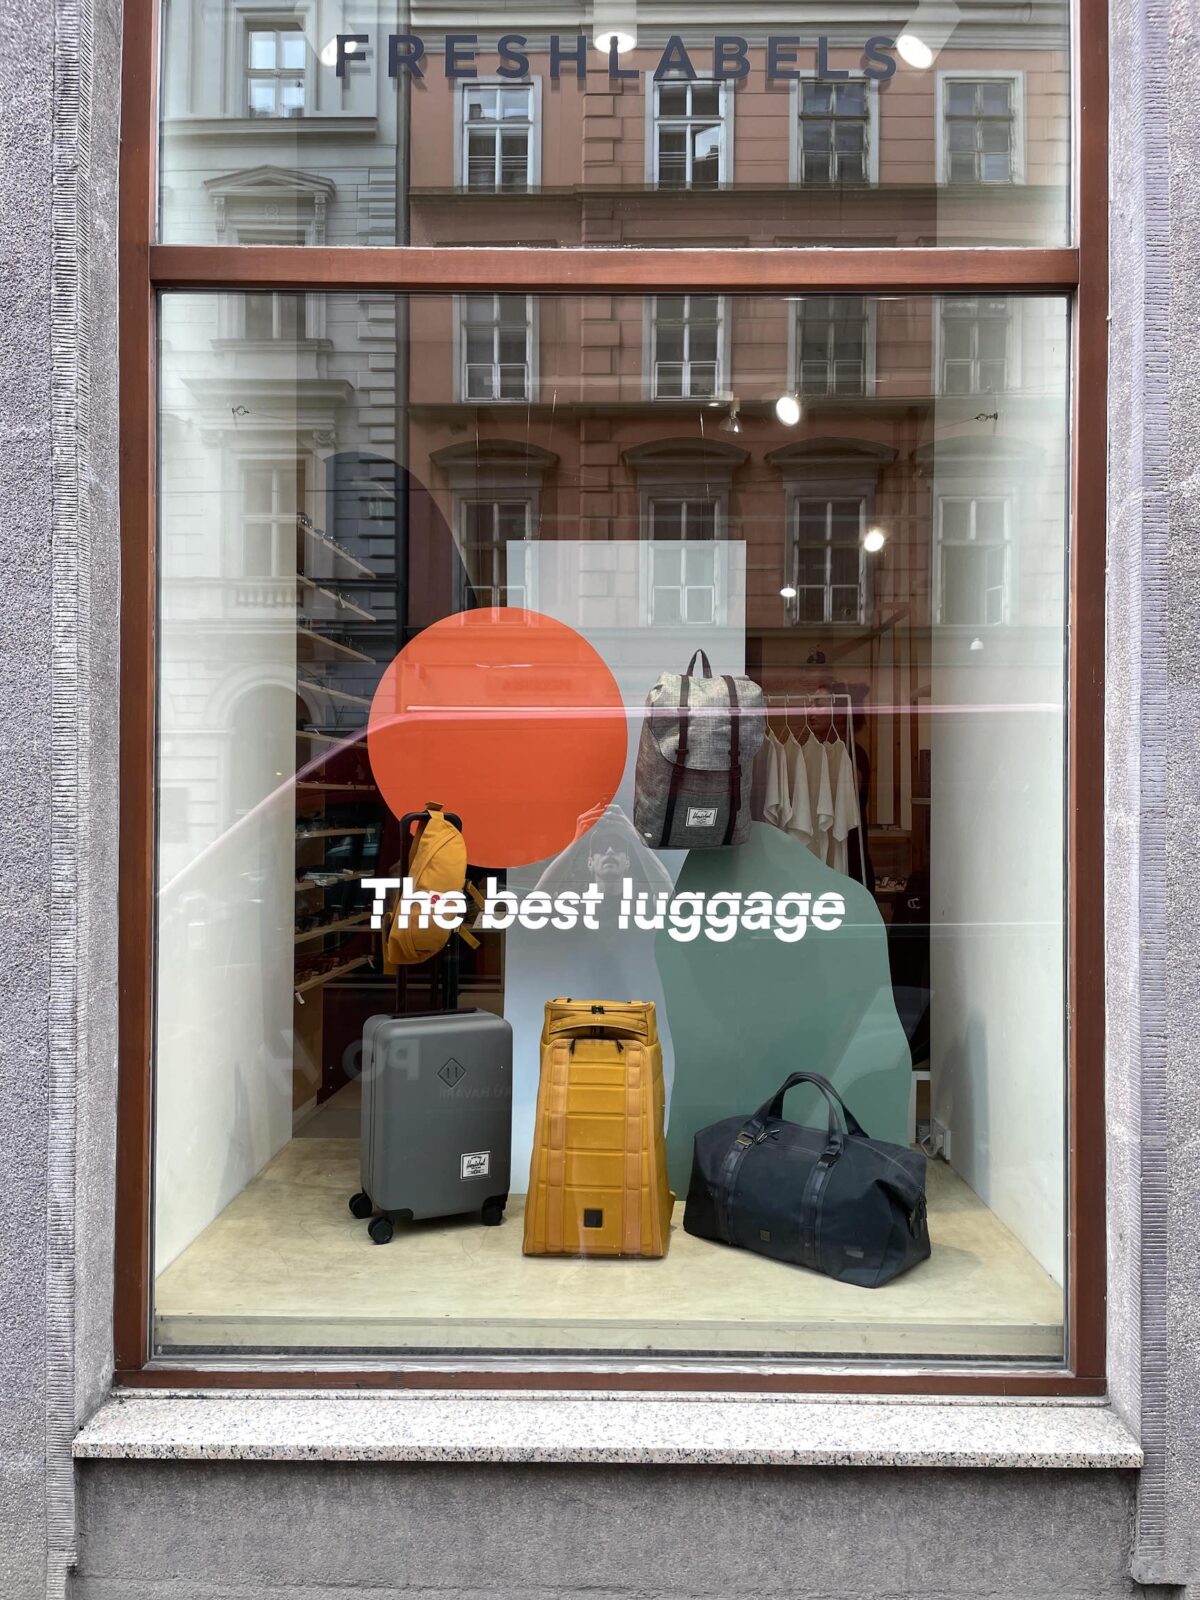 The best luggage